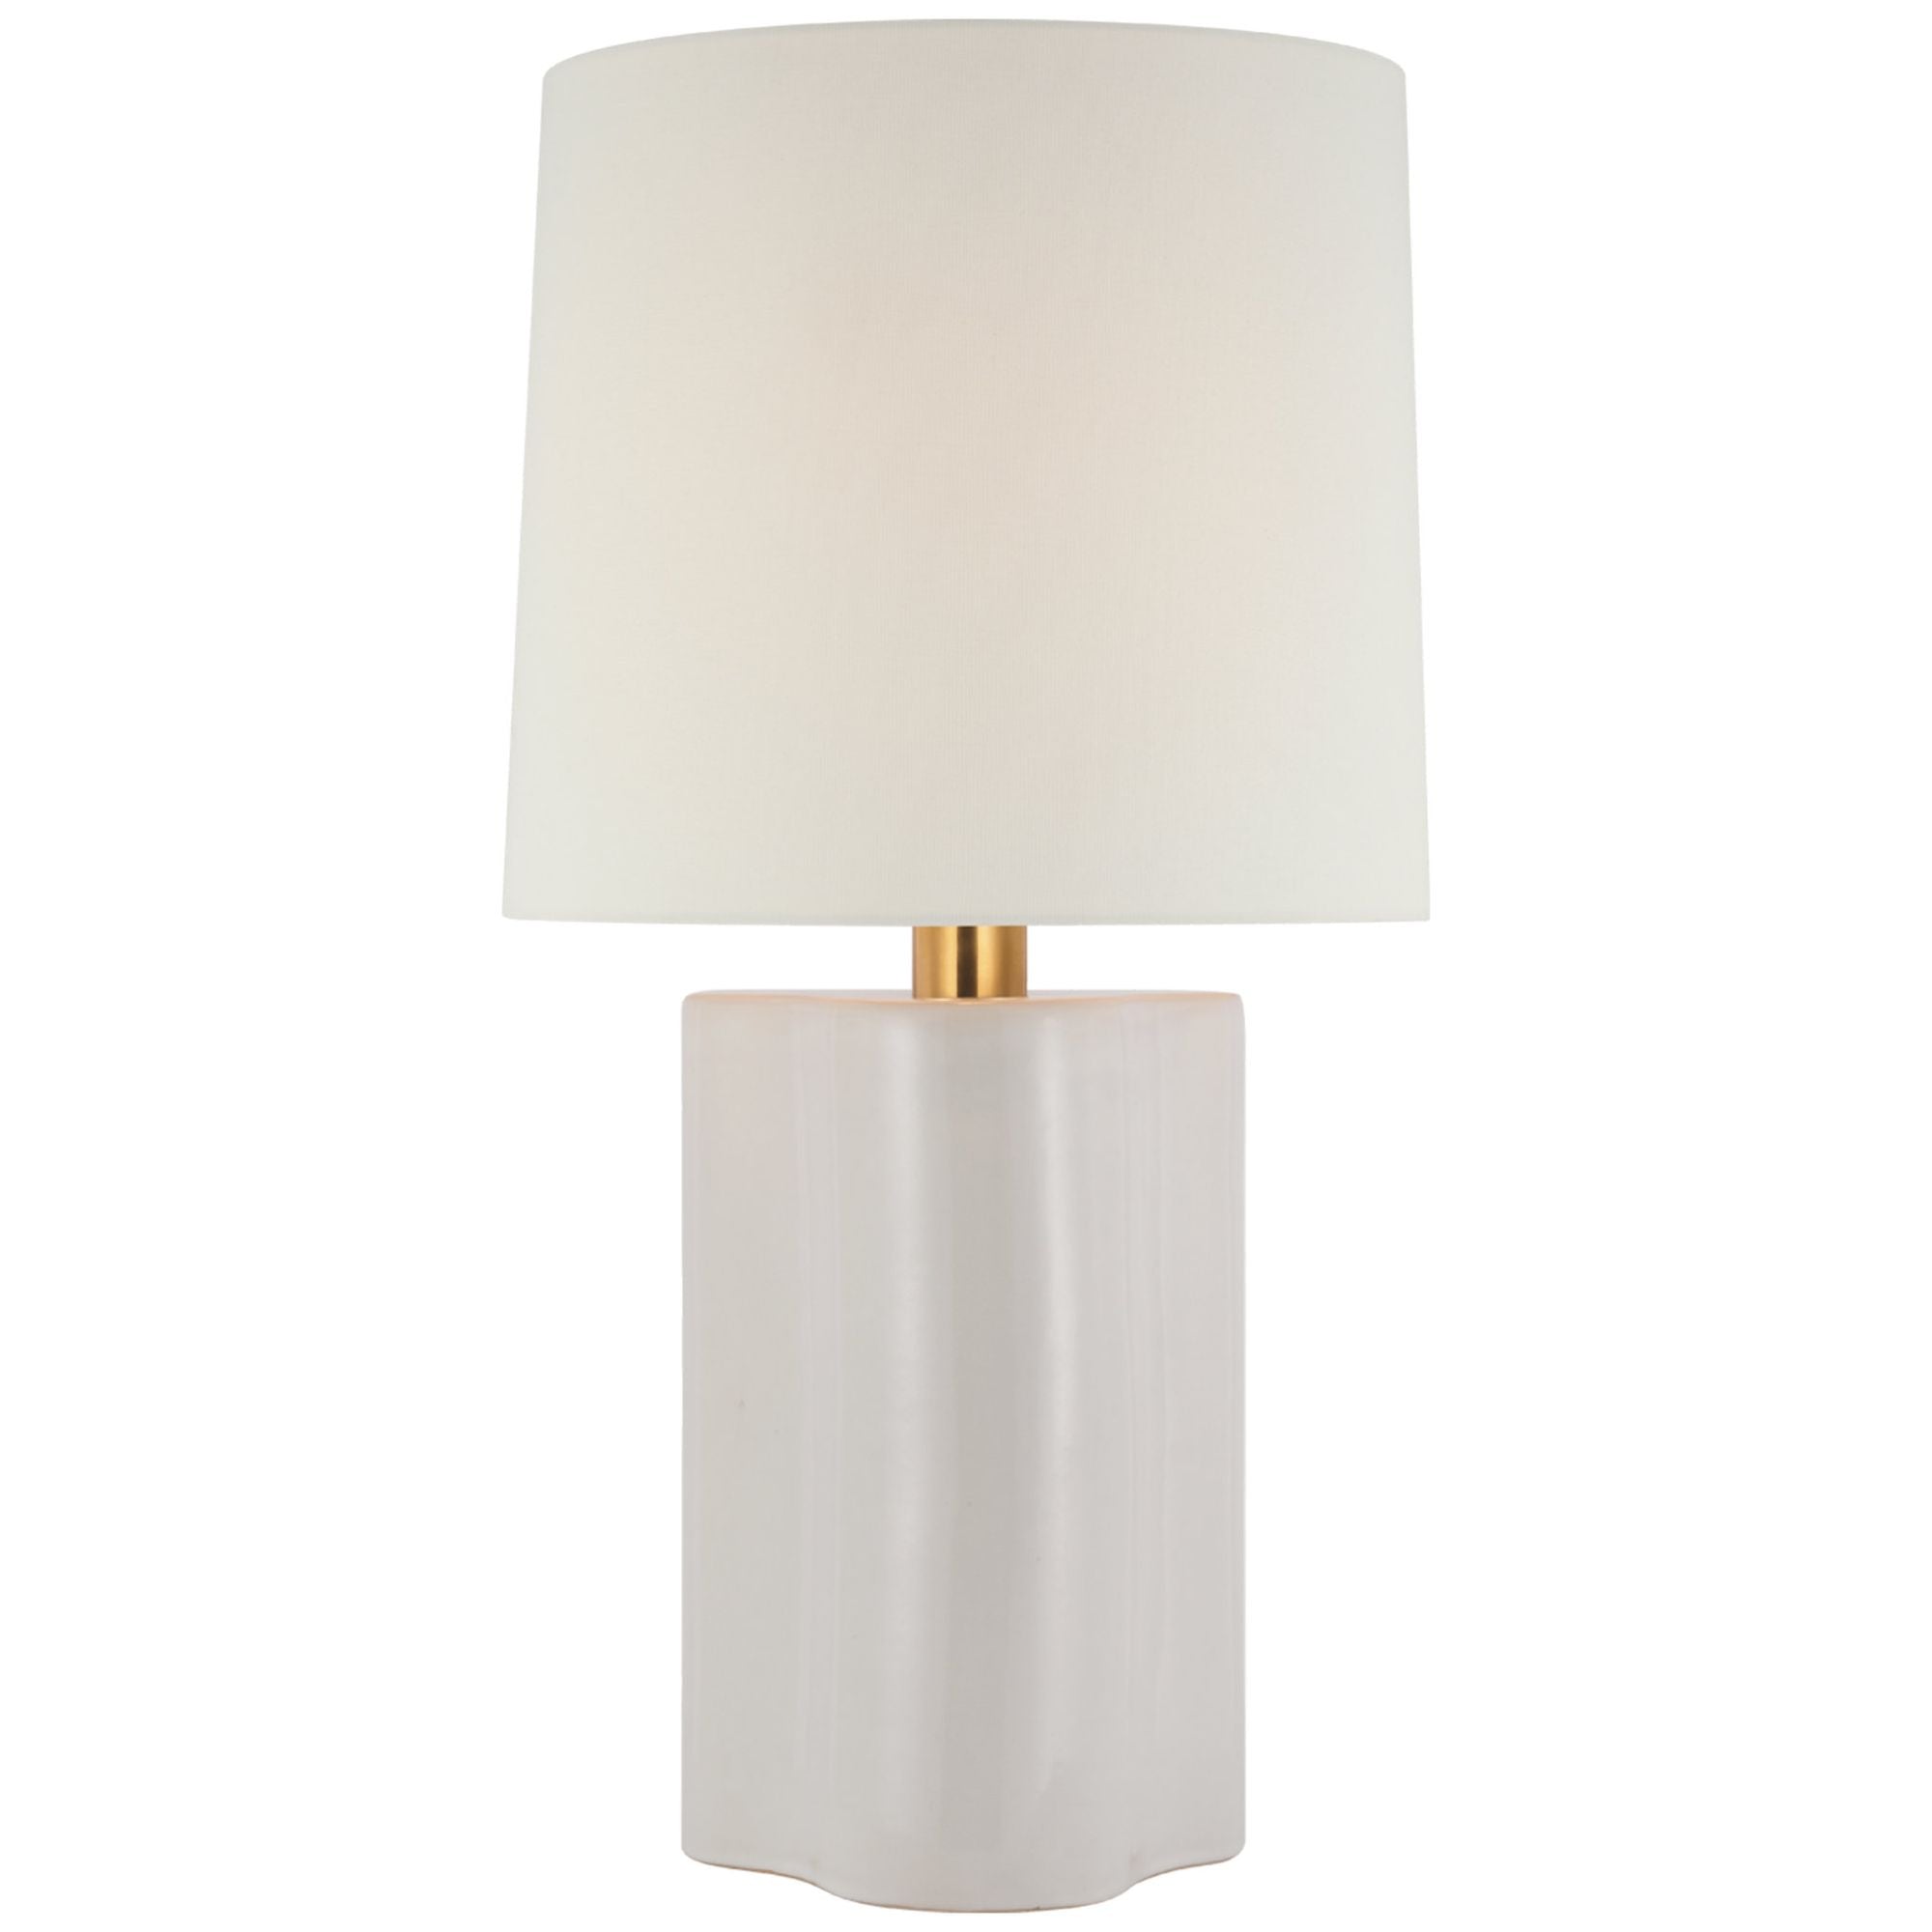 Barbara Barry Lakepoint Large Table Lamp in Ivory with Linen Shade